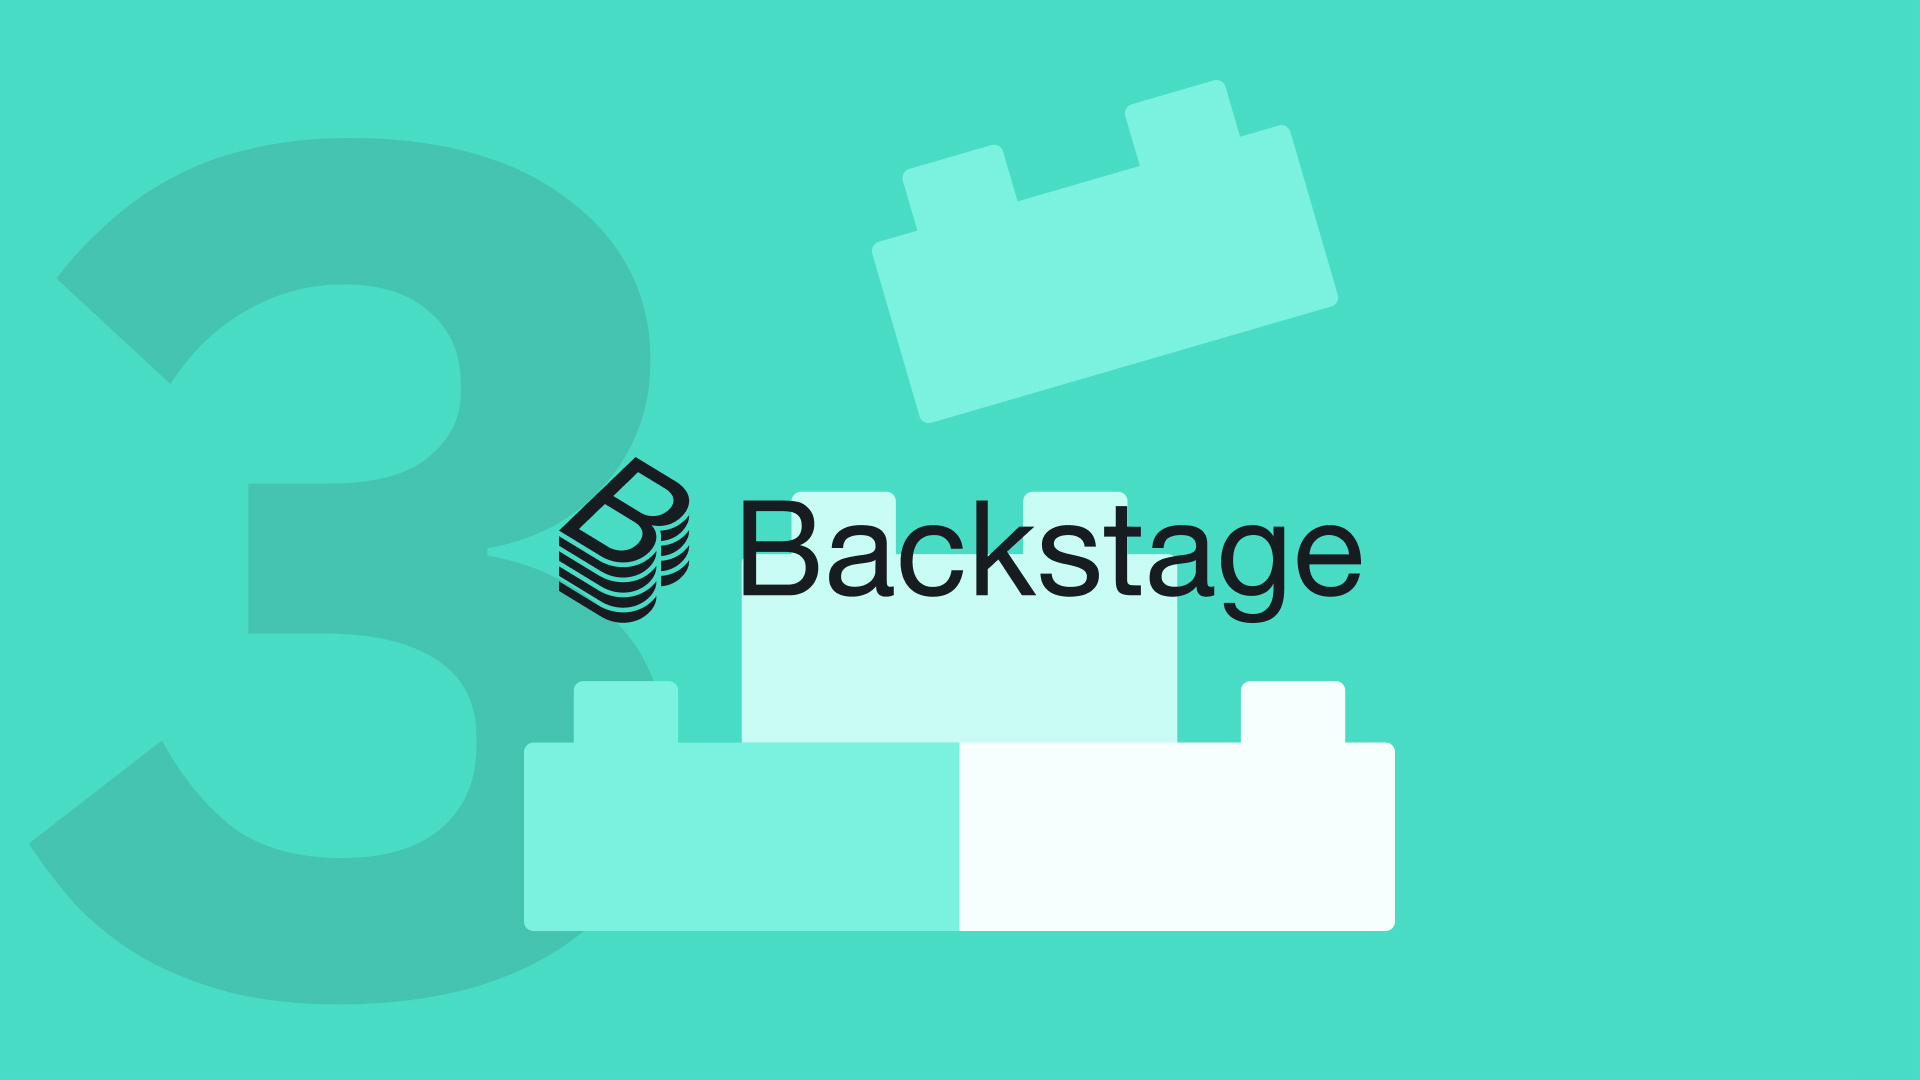 Backstage: Intergrating with Existing Tools Using Plugins